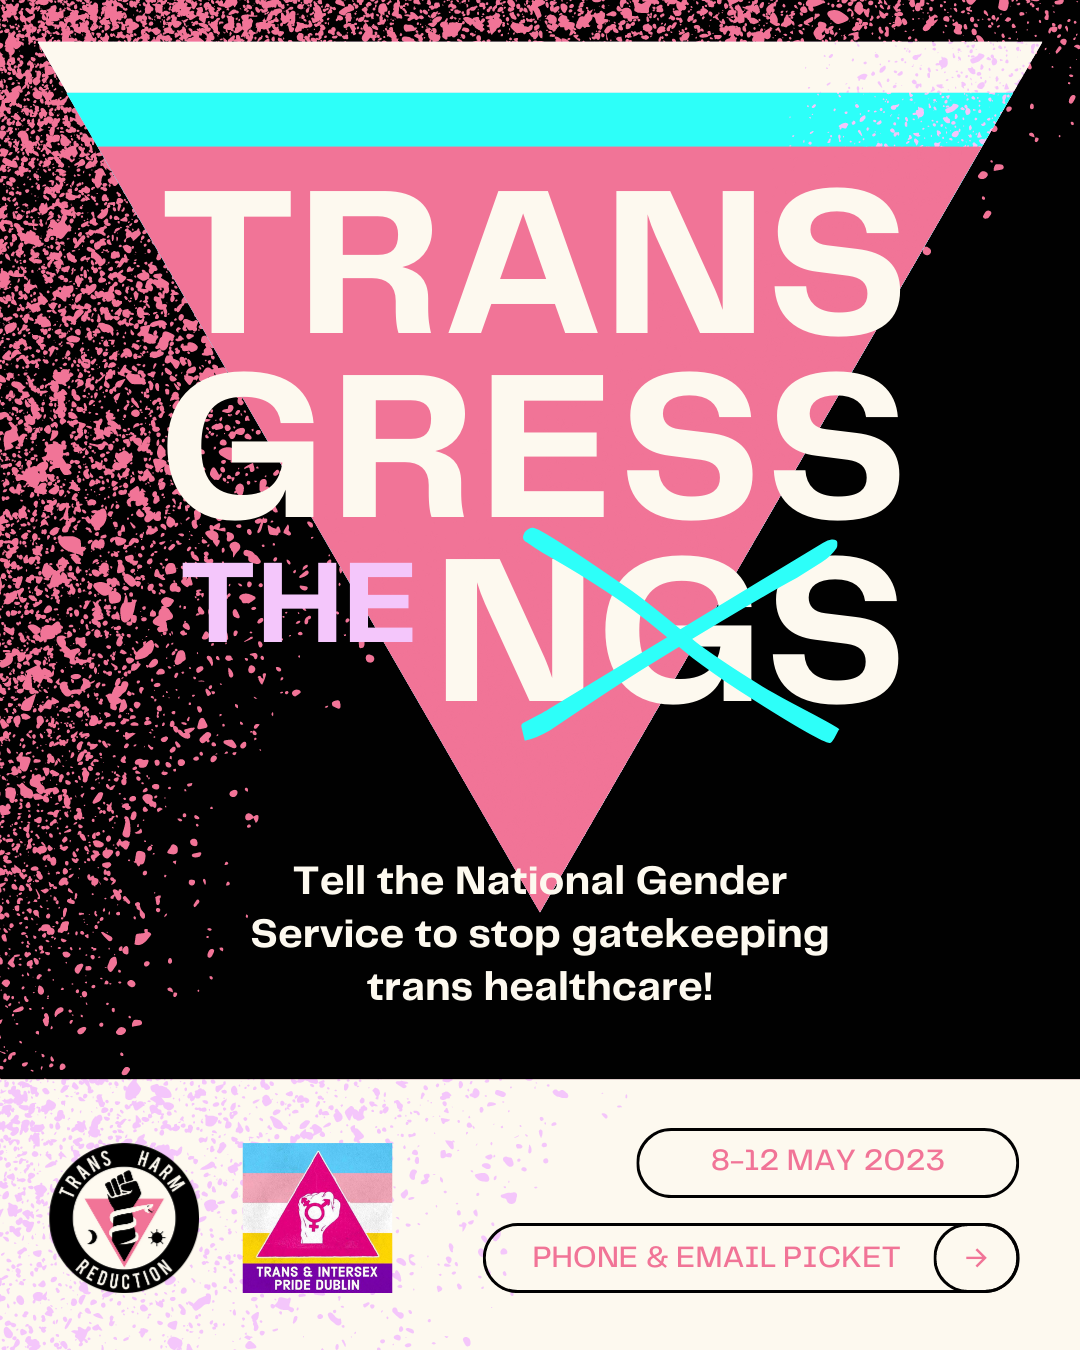 Picture of the trans triangle with a call to action to picket the NGS and to tell the NGS to stop gatekeeping trans healthcare